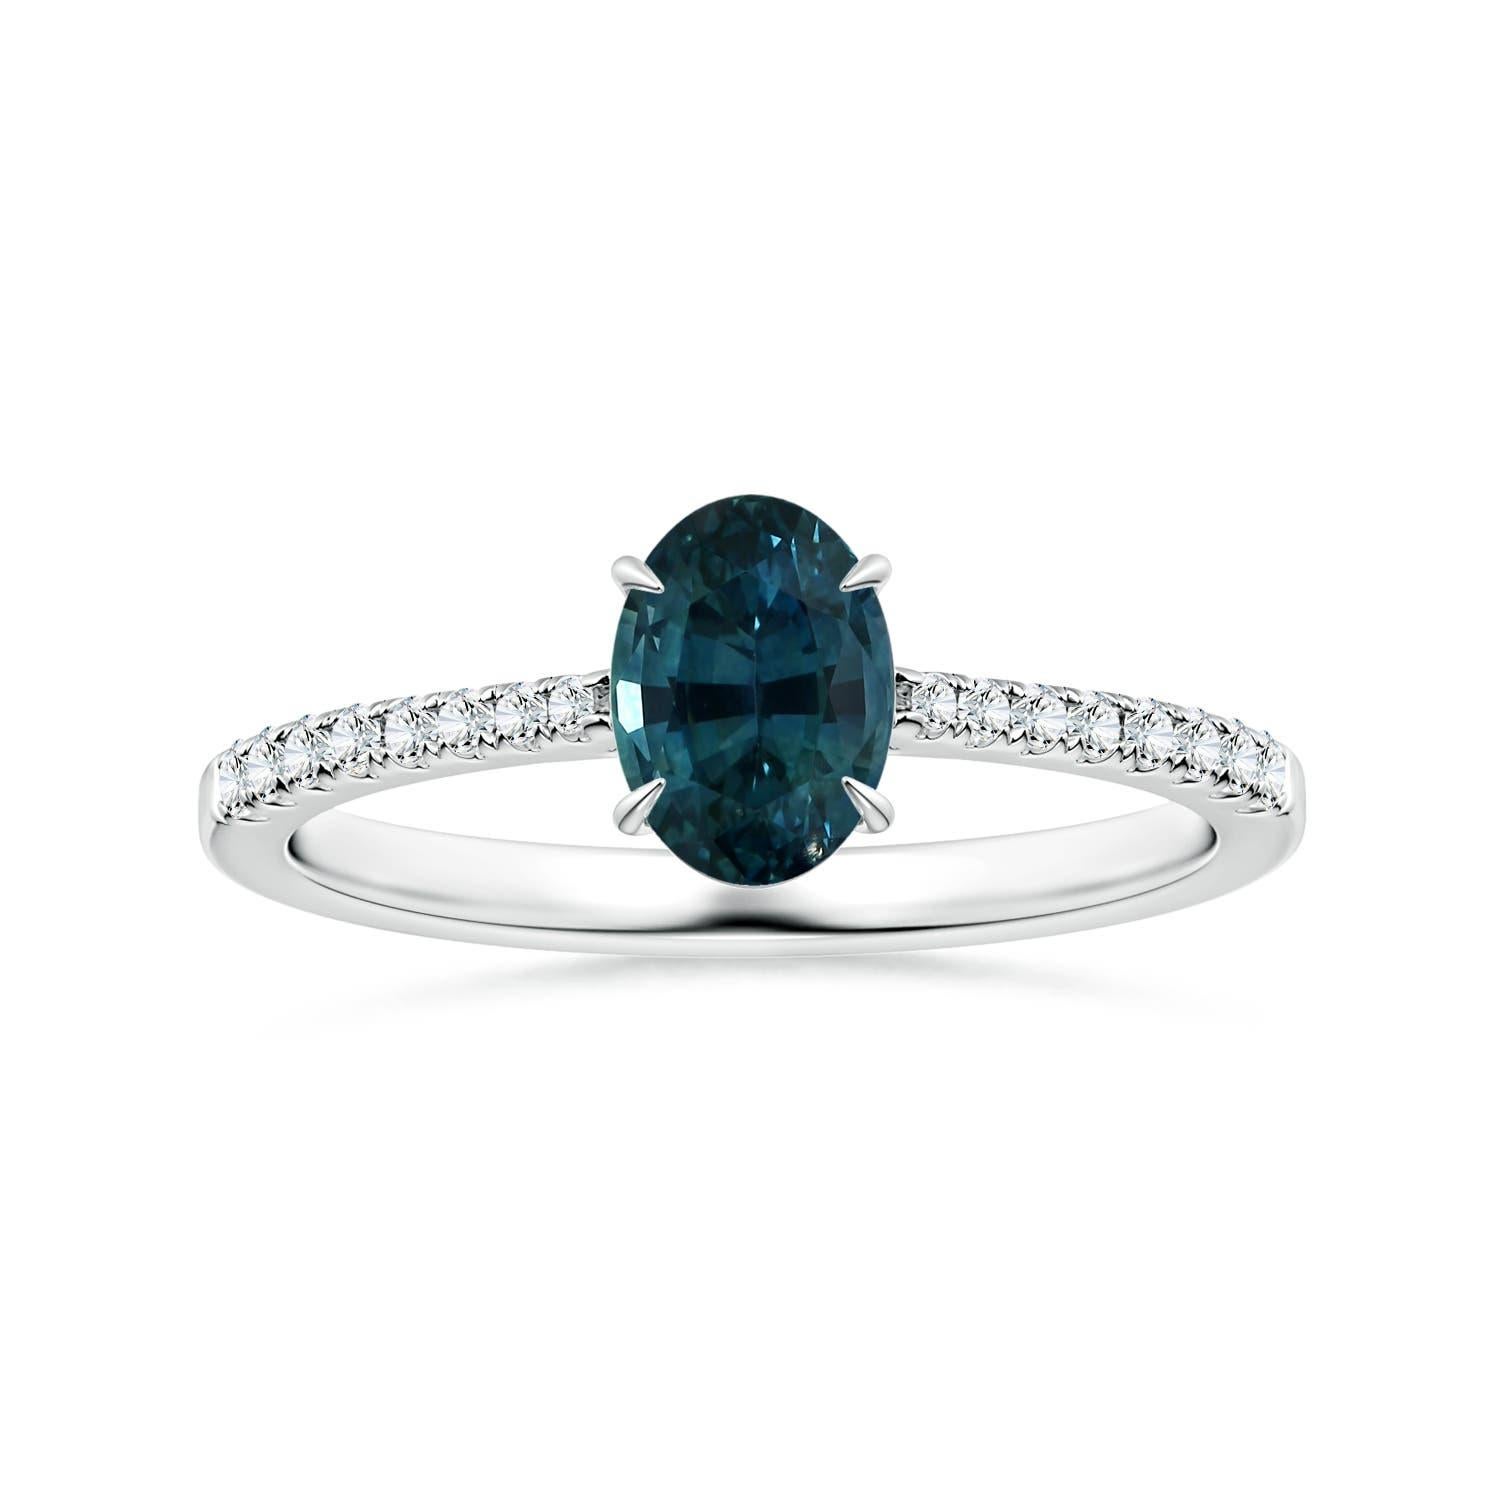 For Sale:  ANGARA GIA Certified Teal Sapphire Ring in White Gold with Diamonds